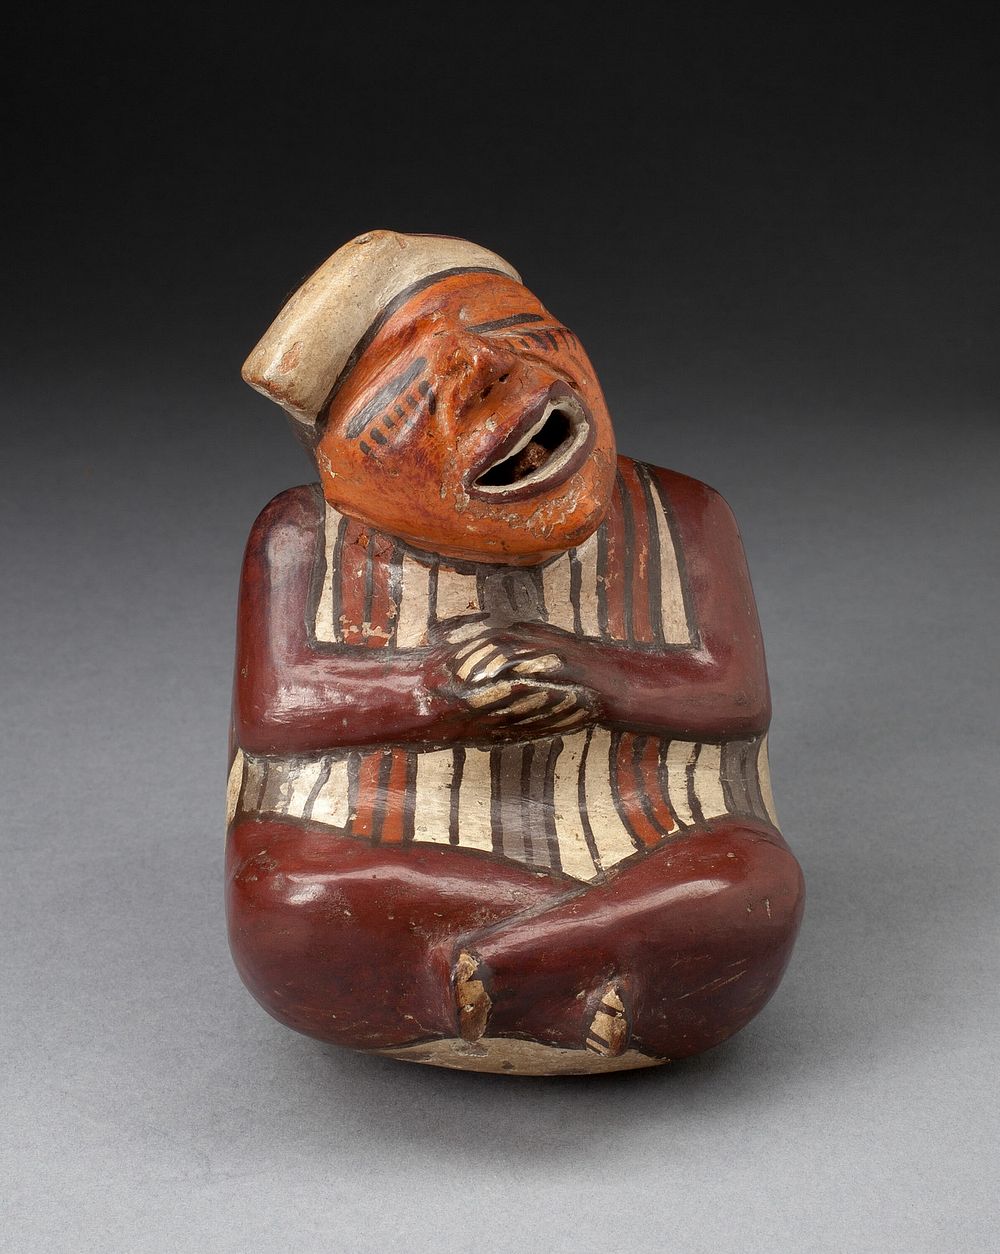 Single Spout Vessel in the Form of a Crossed-Legged Figure, Probably Deceased by Nazca